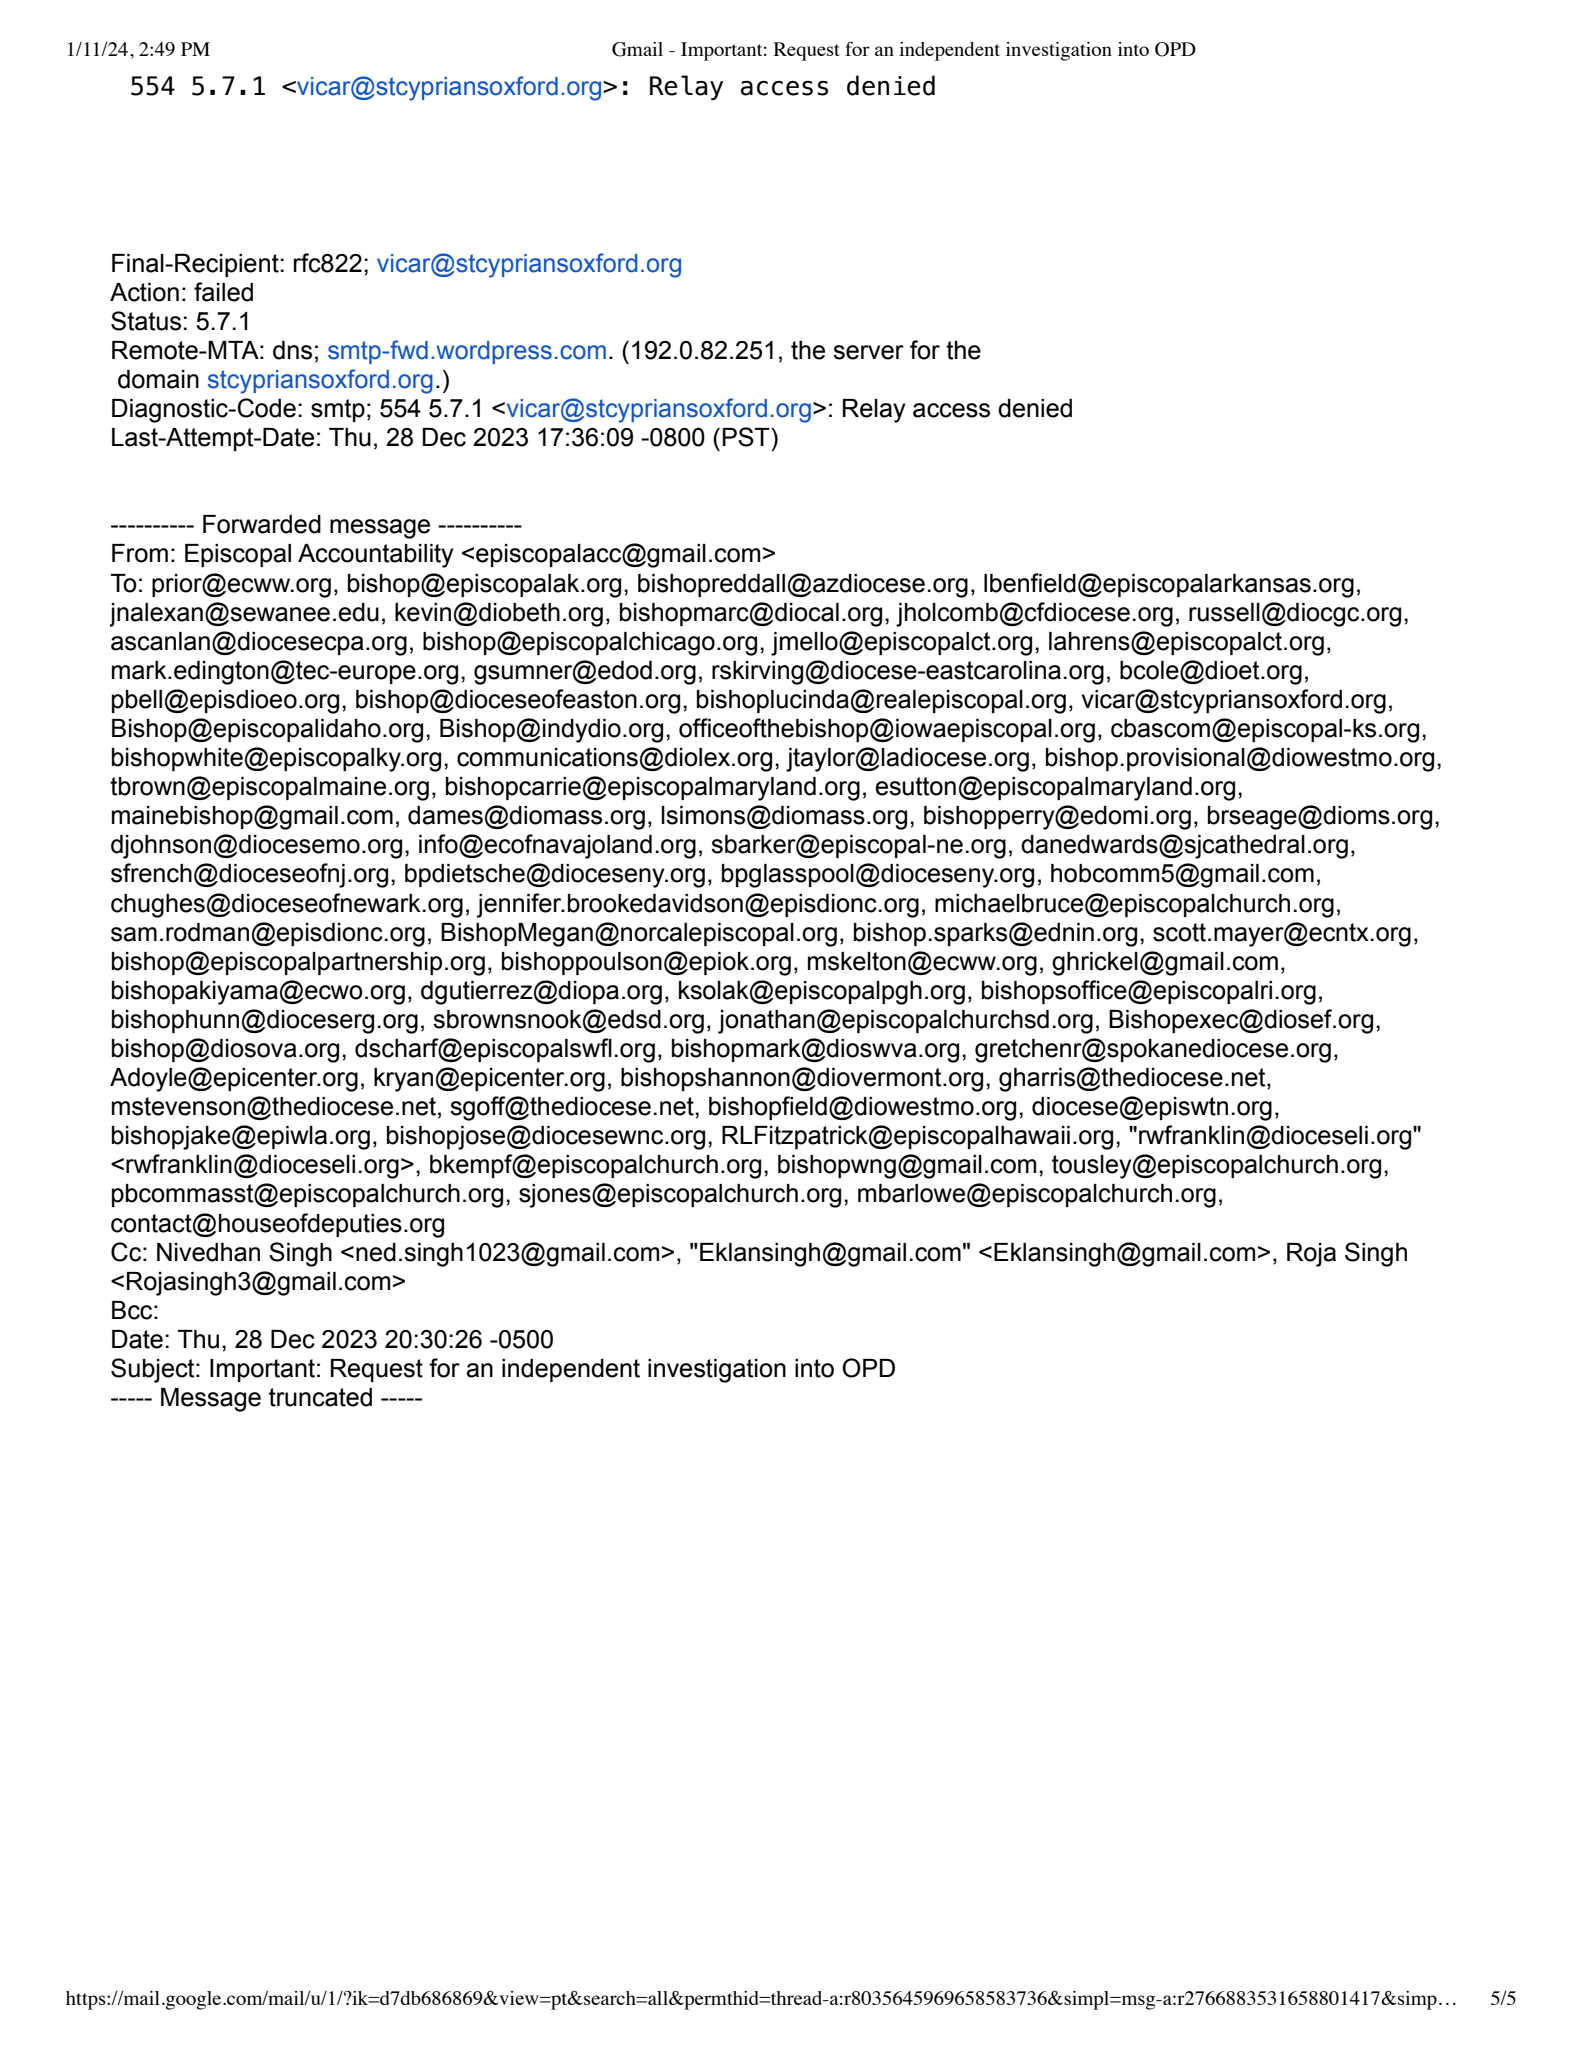 Investigation request email - Page 5